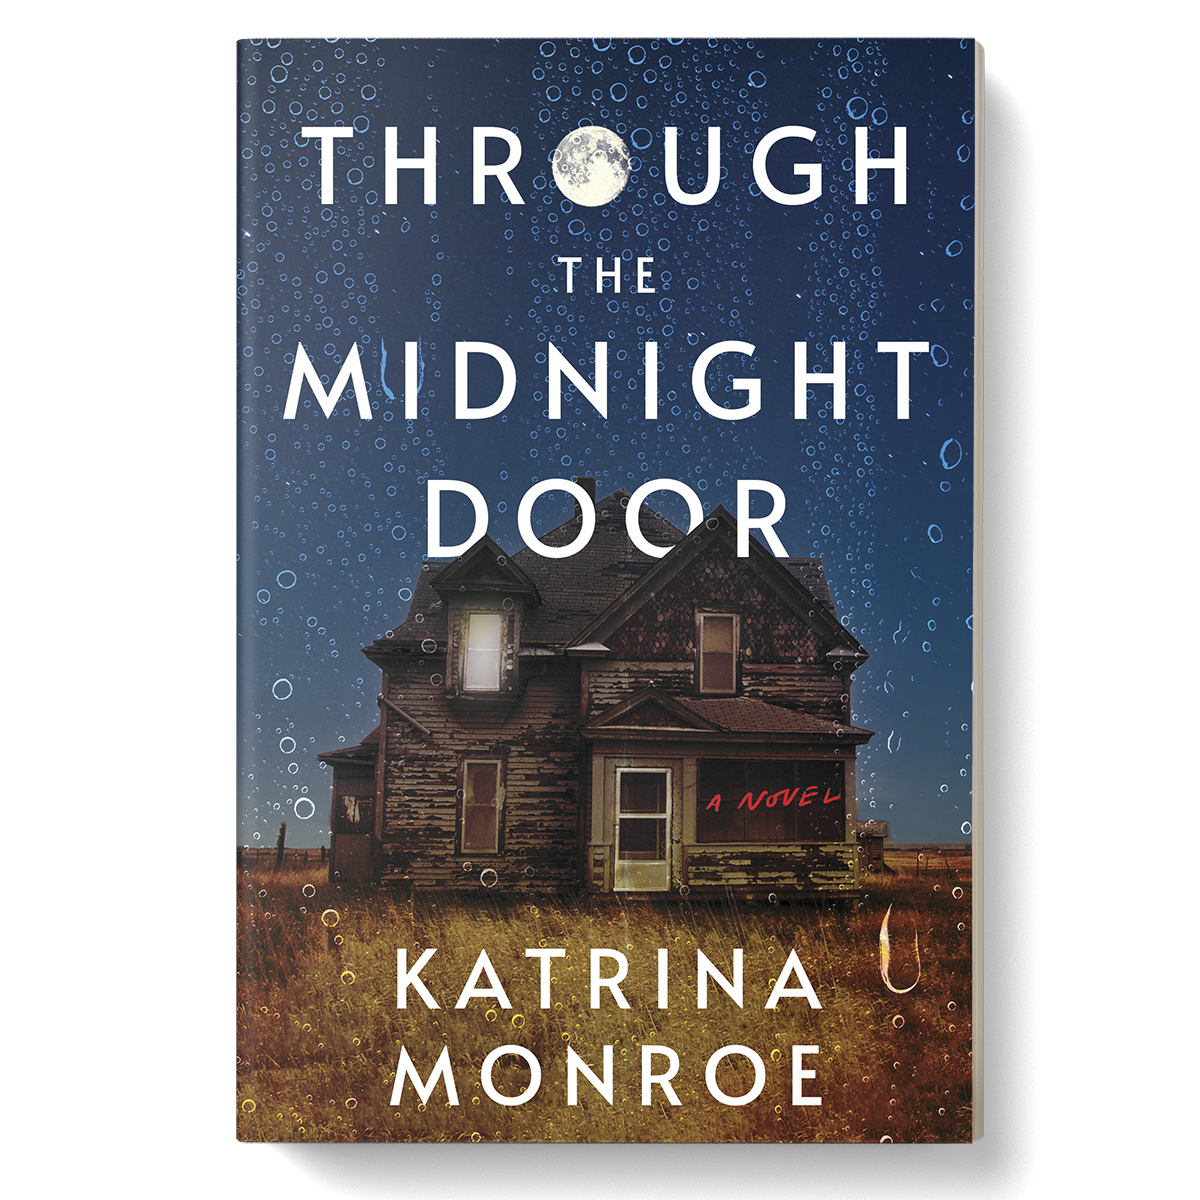 Cover of Through the Midnight Door, with a run down farm house against a night sky